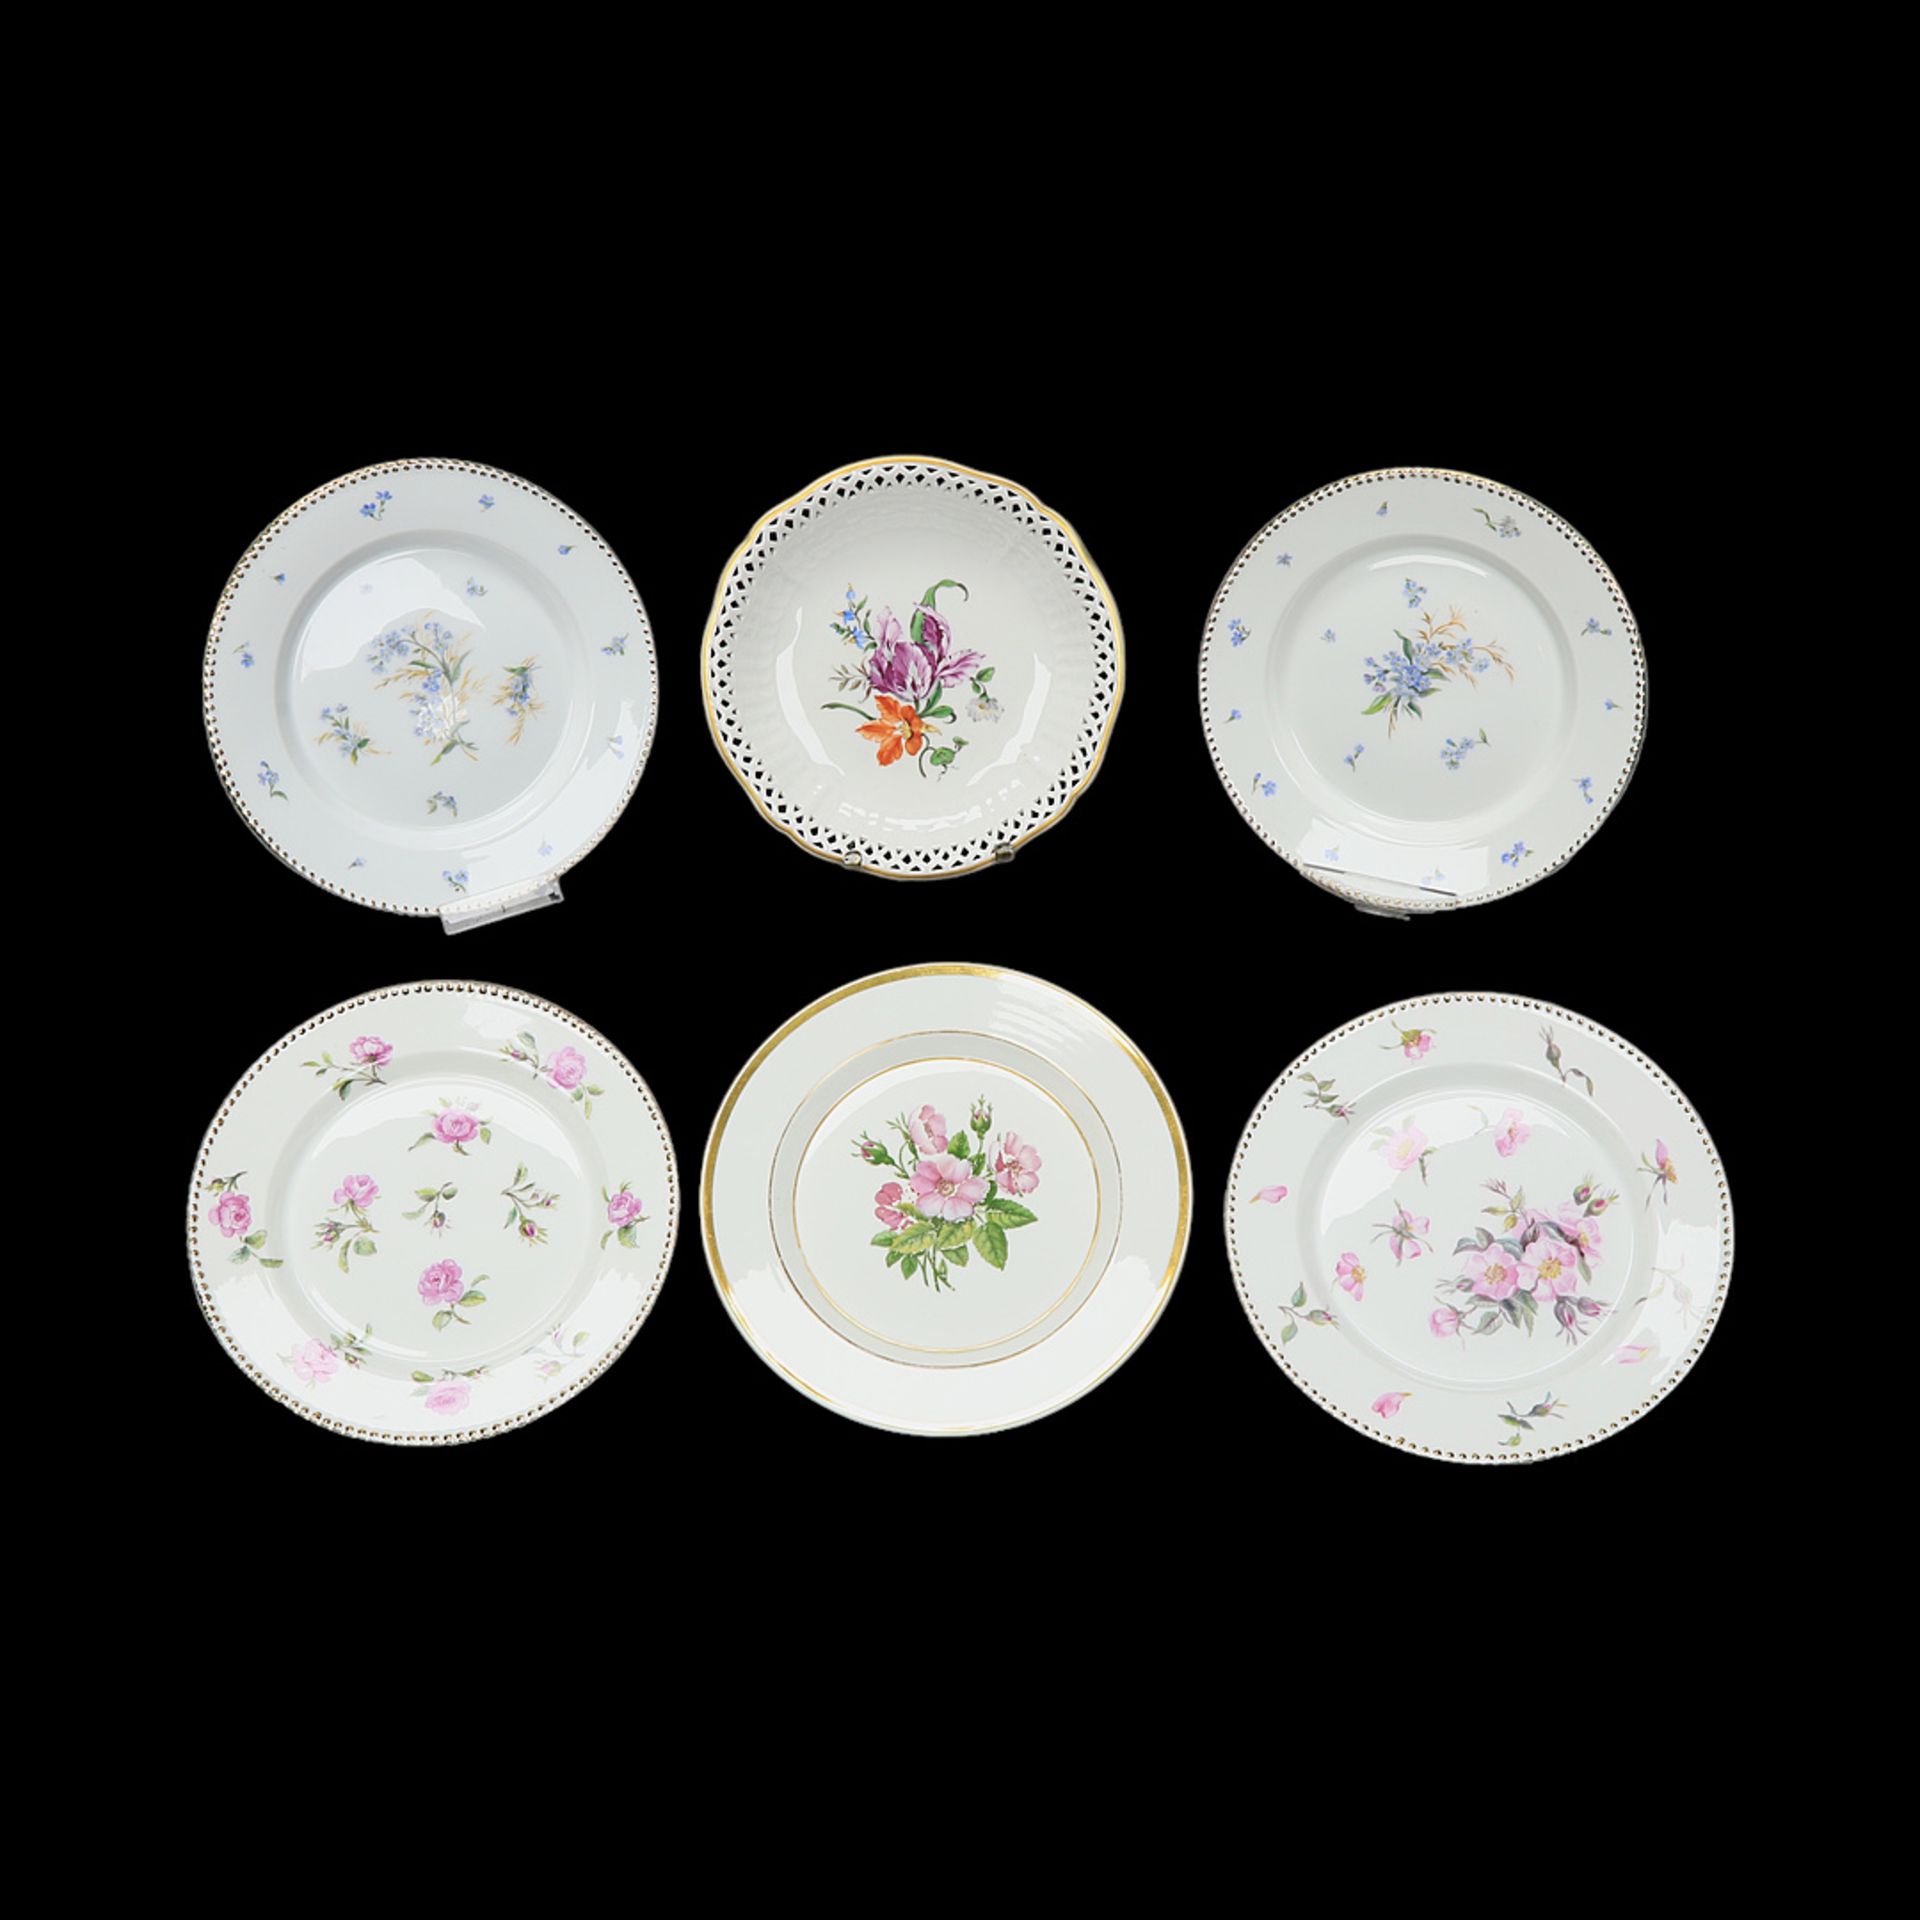 Six KPM Berlin plates with house painting